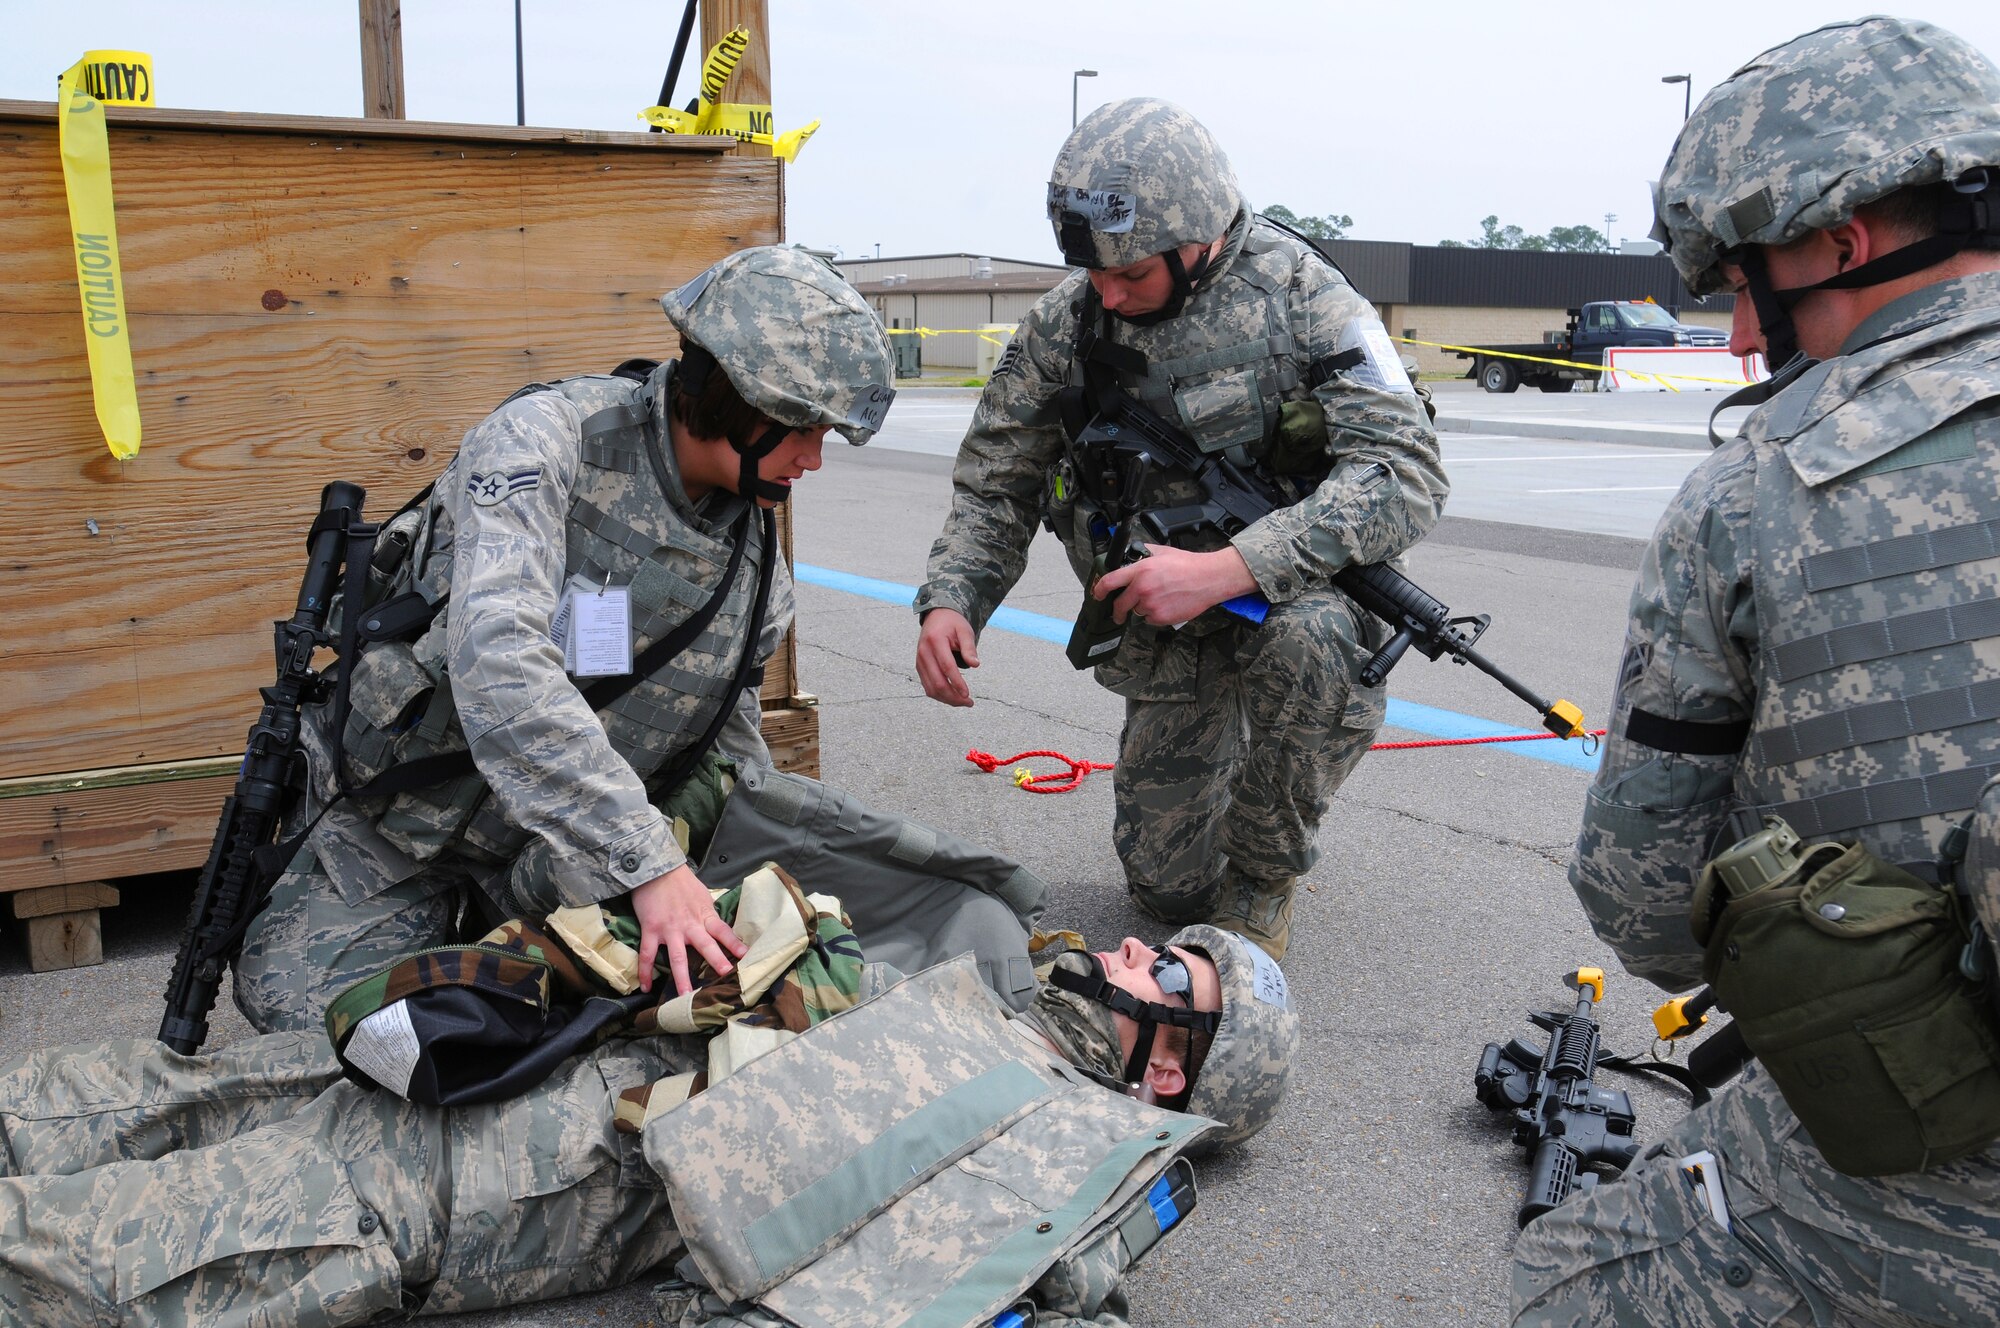 Airmen from the notional 104th Air Expeditionary Wing render simulated self-aid and buddy care to a wounded troop April 24, 2010 following an enemy attack during the Operational Readiness Exercise at the Gulfport Combat Readiness Training Center in Gulfport, Miss. (U.S. Air Force photo/Tech. Sgt. Dennis Flora)